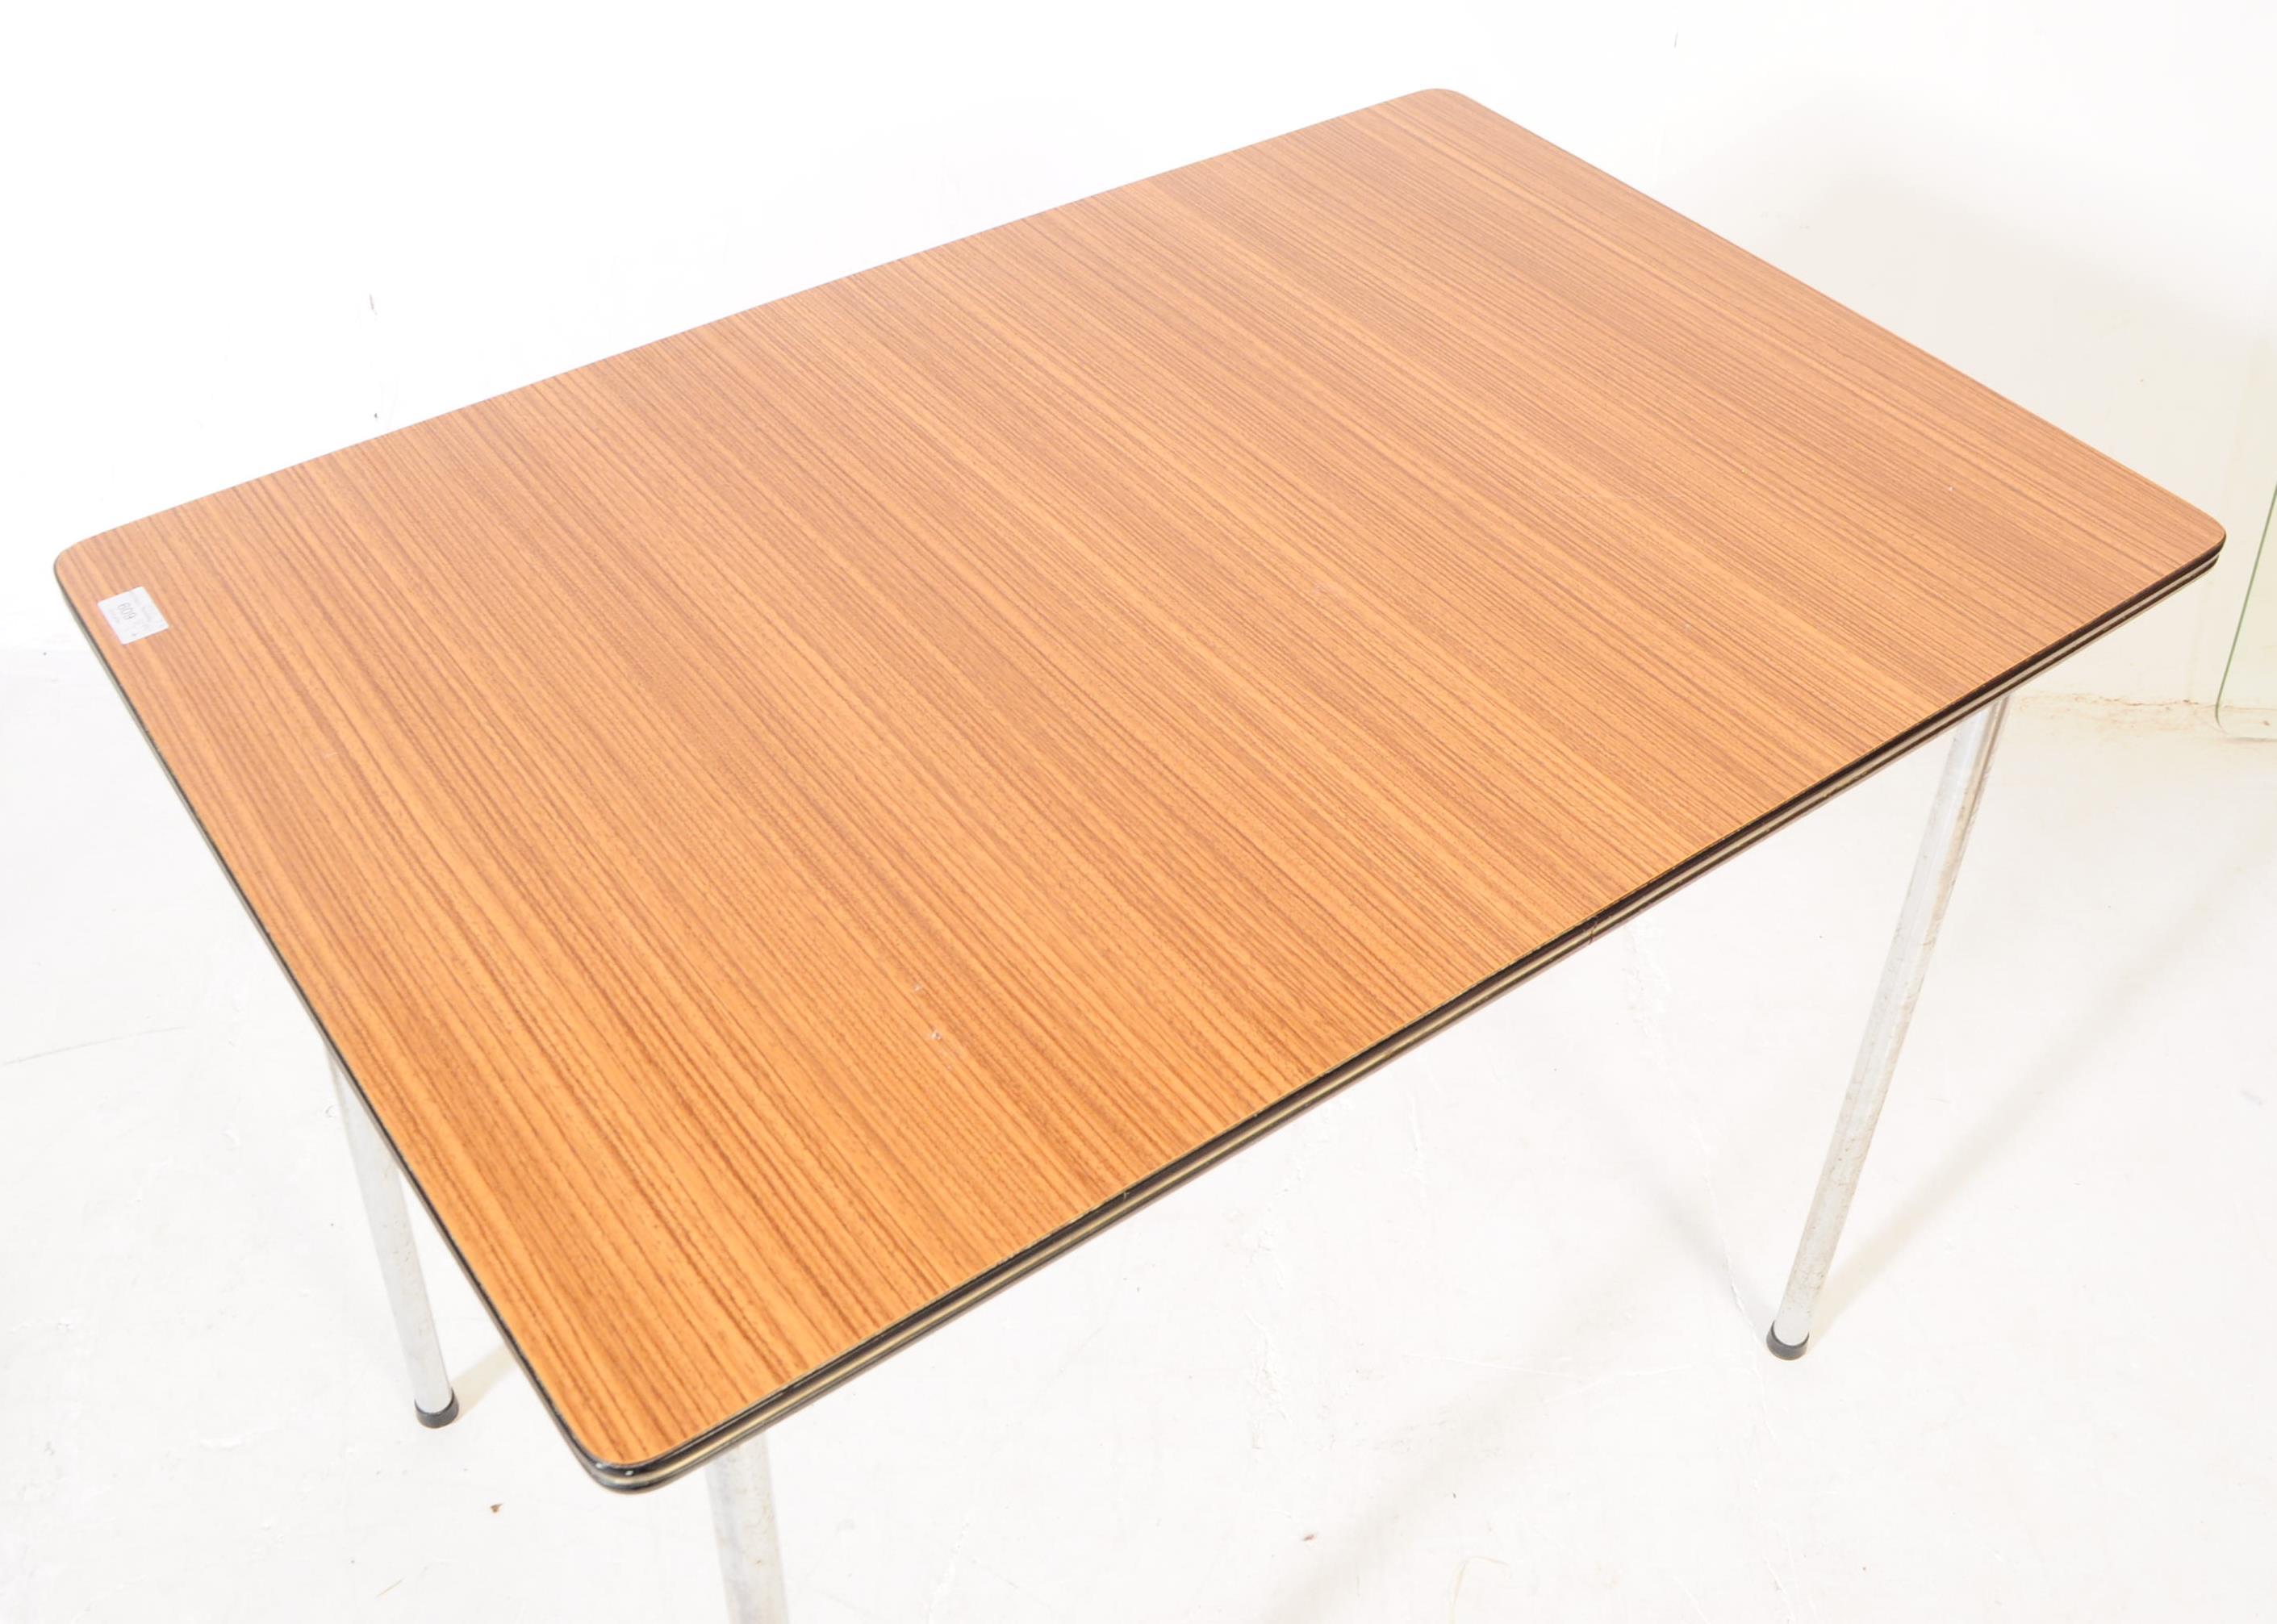 BRITISH MODERN DESIGN - FORMICA KITCHEN TABLE - CHAIRS - STOOLS - Image 5 of 9